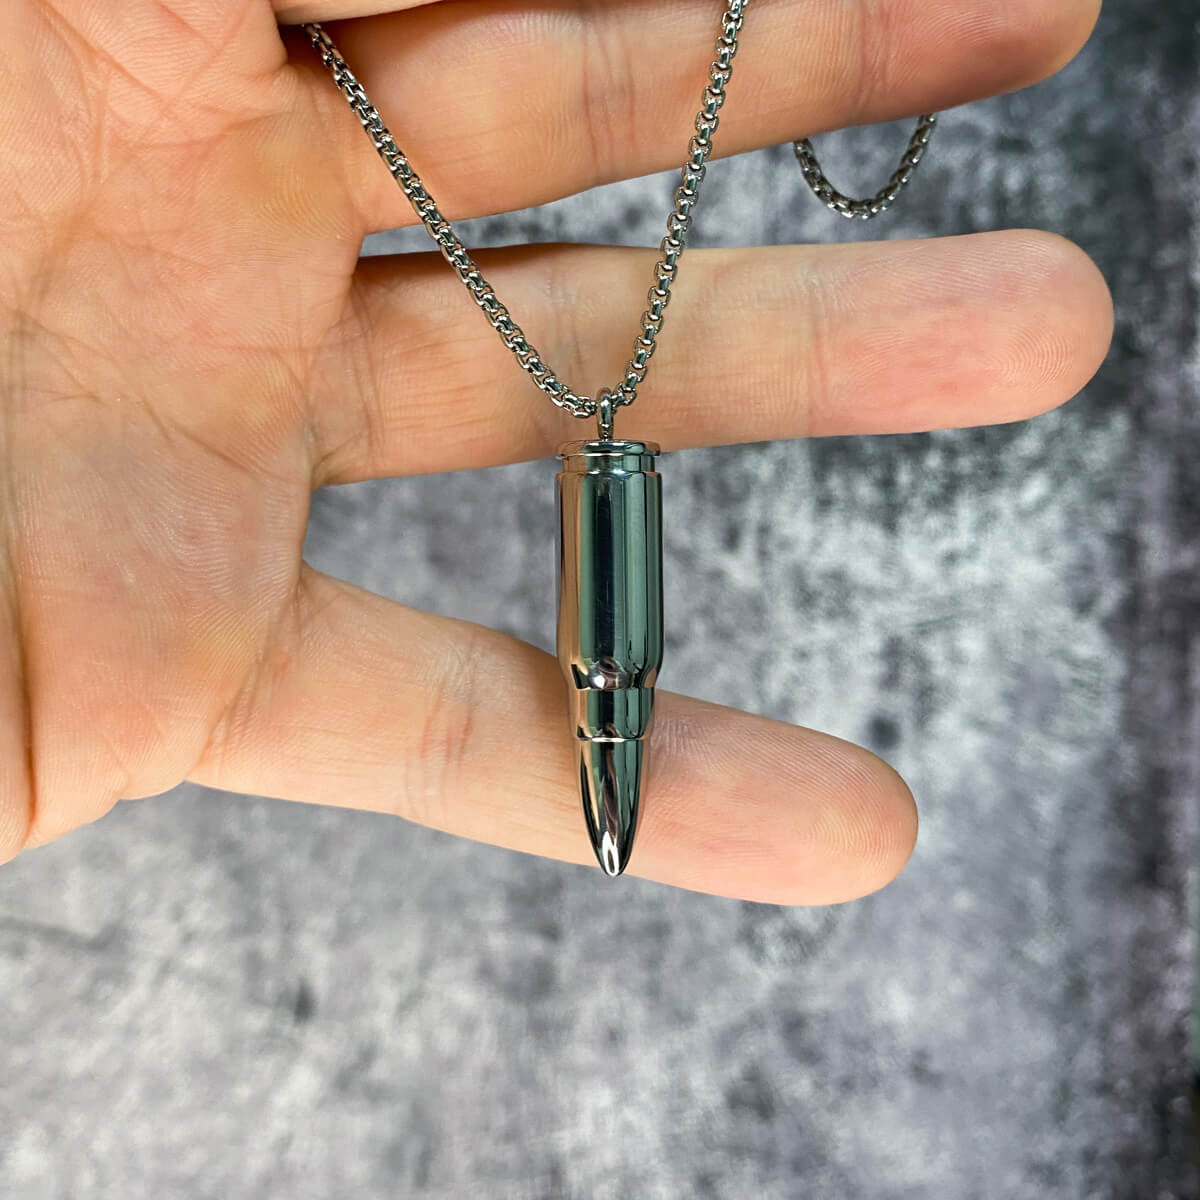 Bullet pendant with steel necklace (Steel 316L)